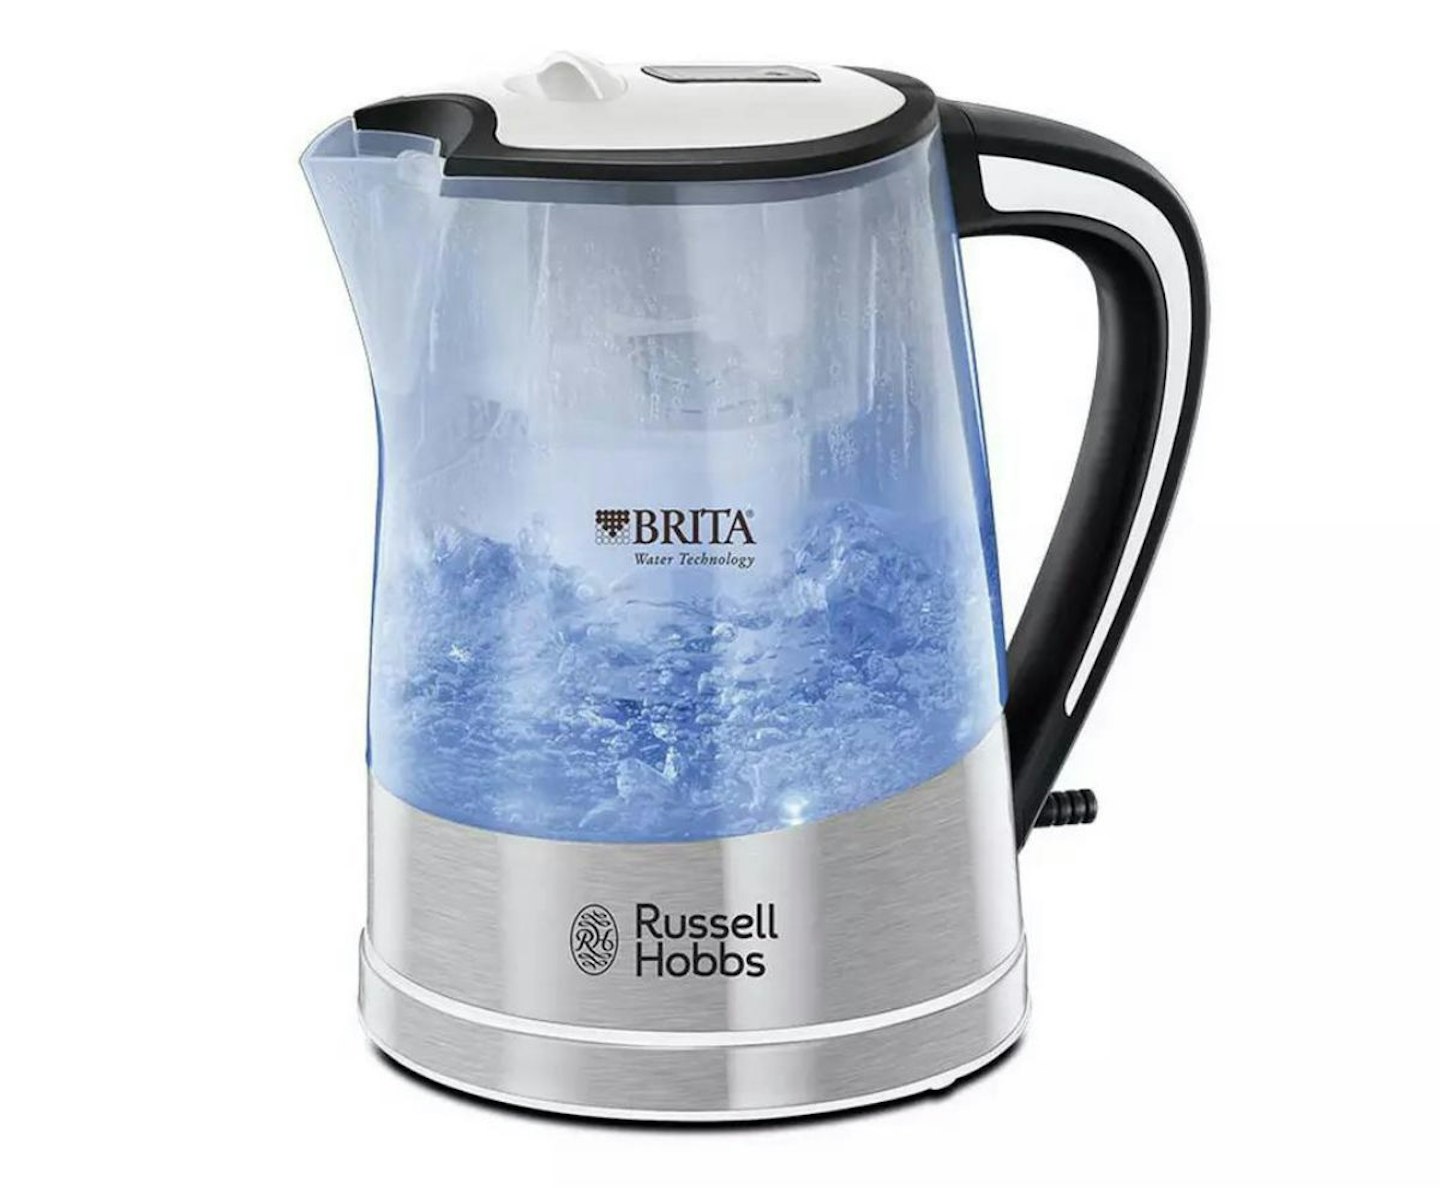 Russell Hobbs Brita Purity Filter Clear Plastic Kettle 22851 